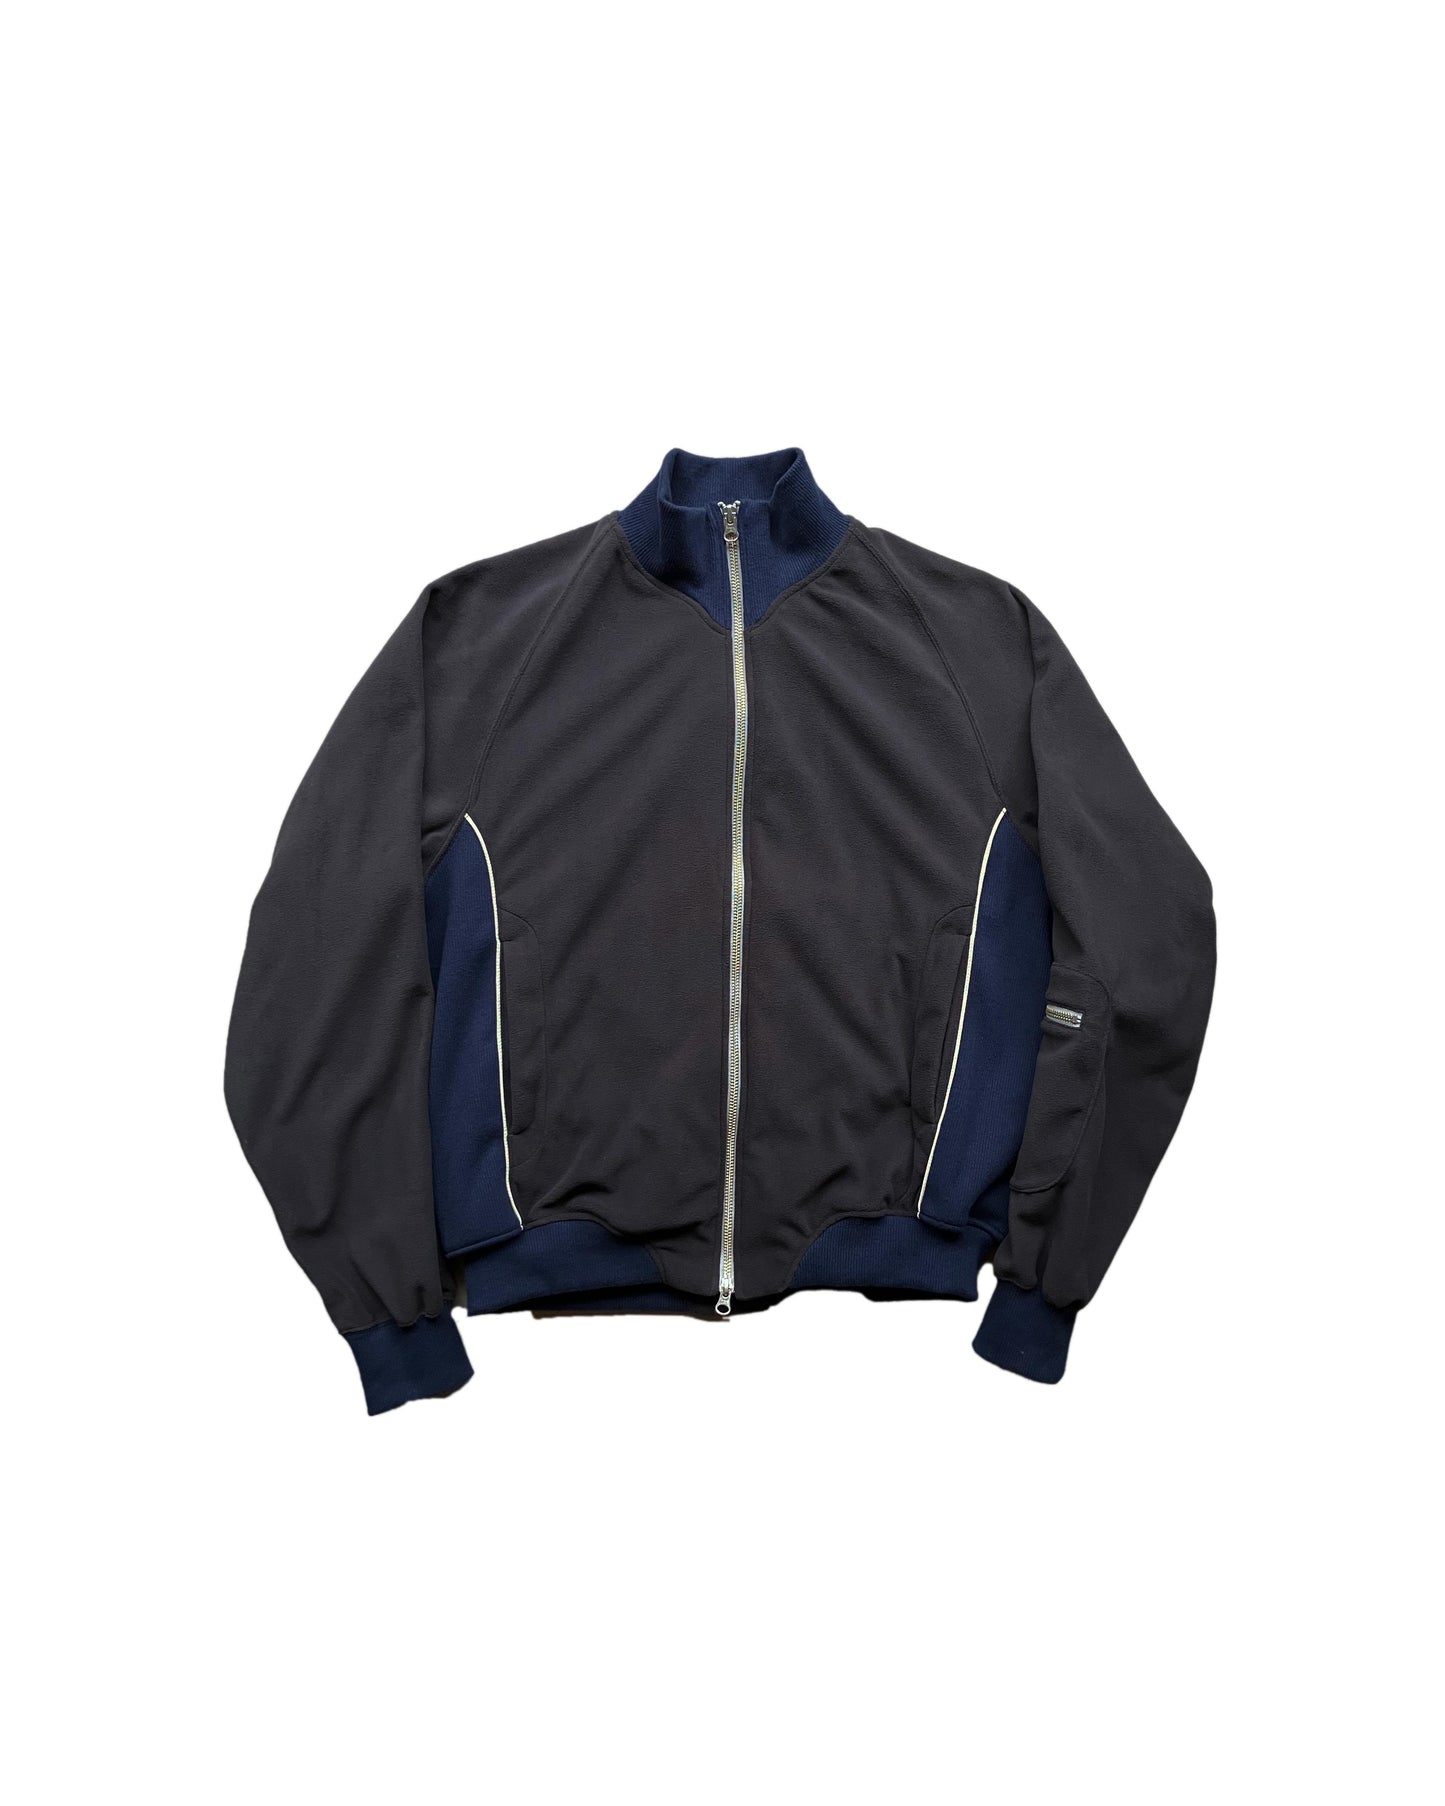 Call - CL_AW23_CS_02 / TRACK JACKET - Charcoal